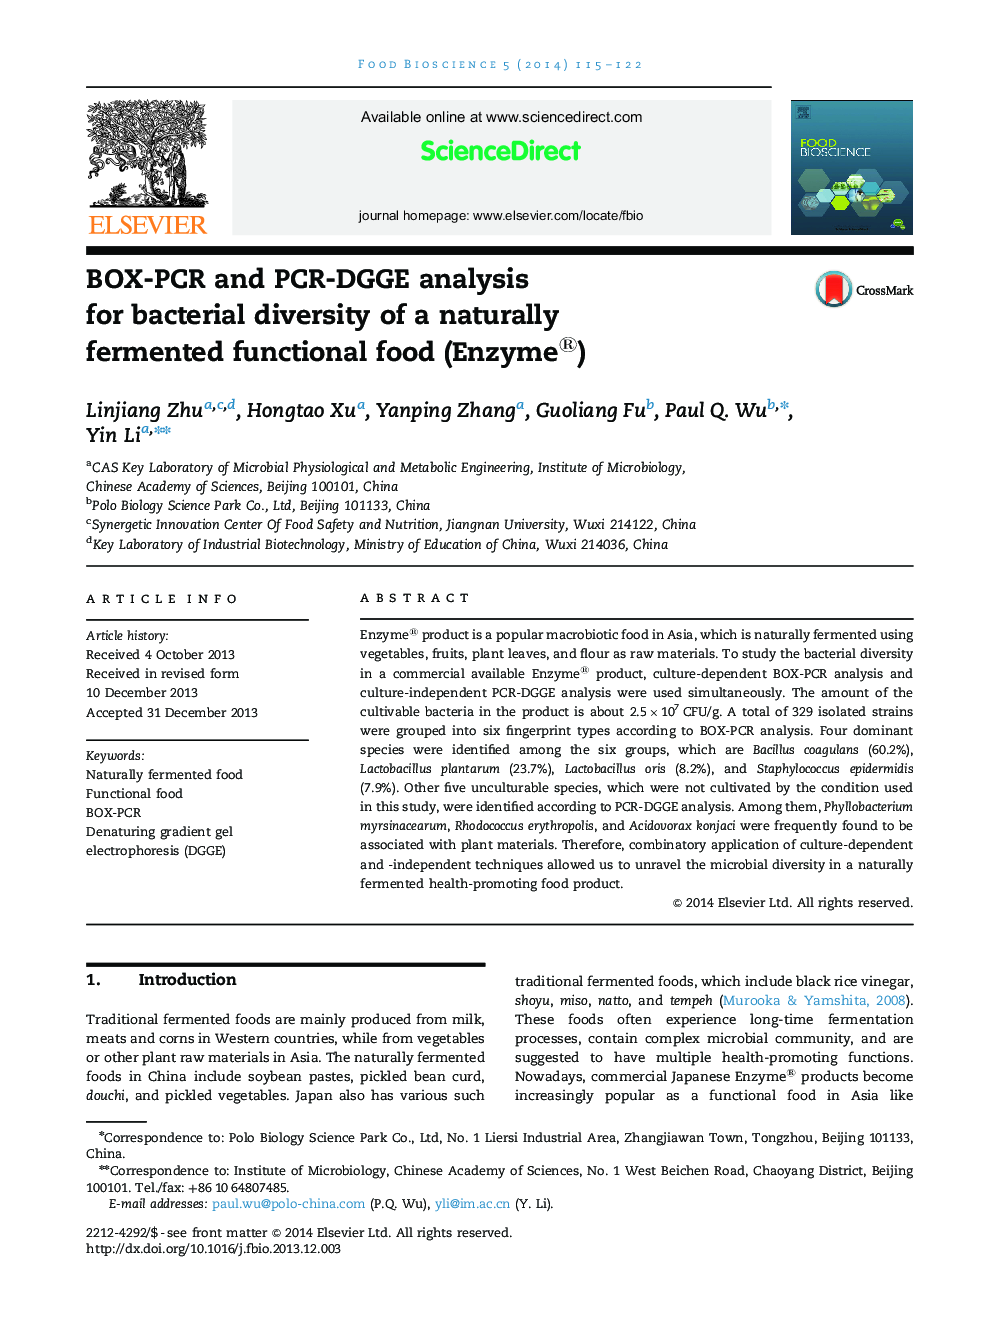 BOX-PCR and PCR-DGGE analysis for bacterial diversity of a naturally fermented functional food (Enzyme®)